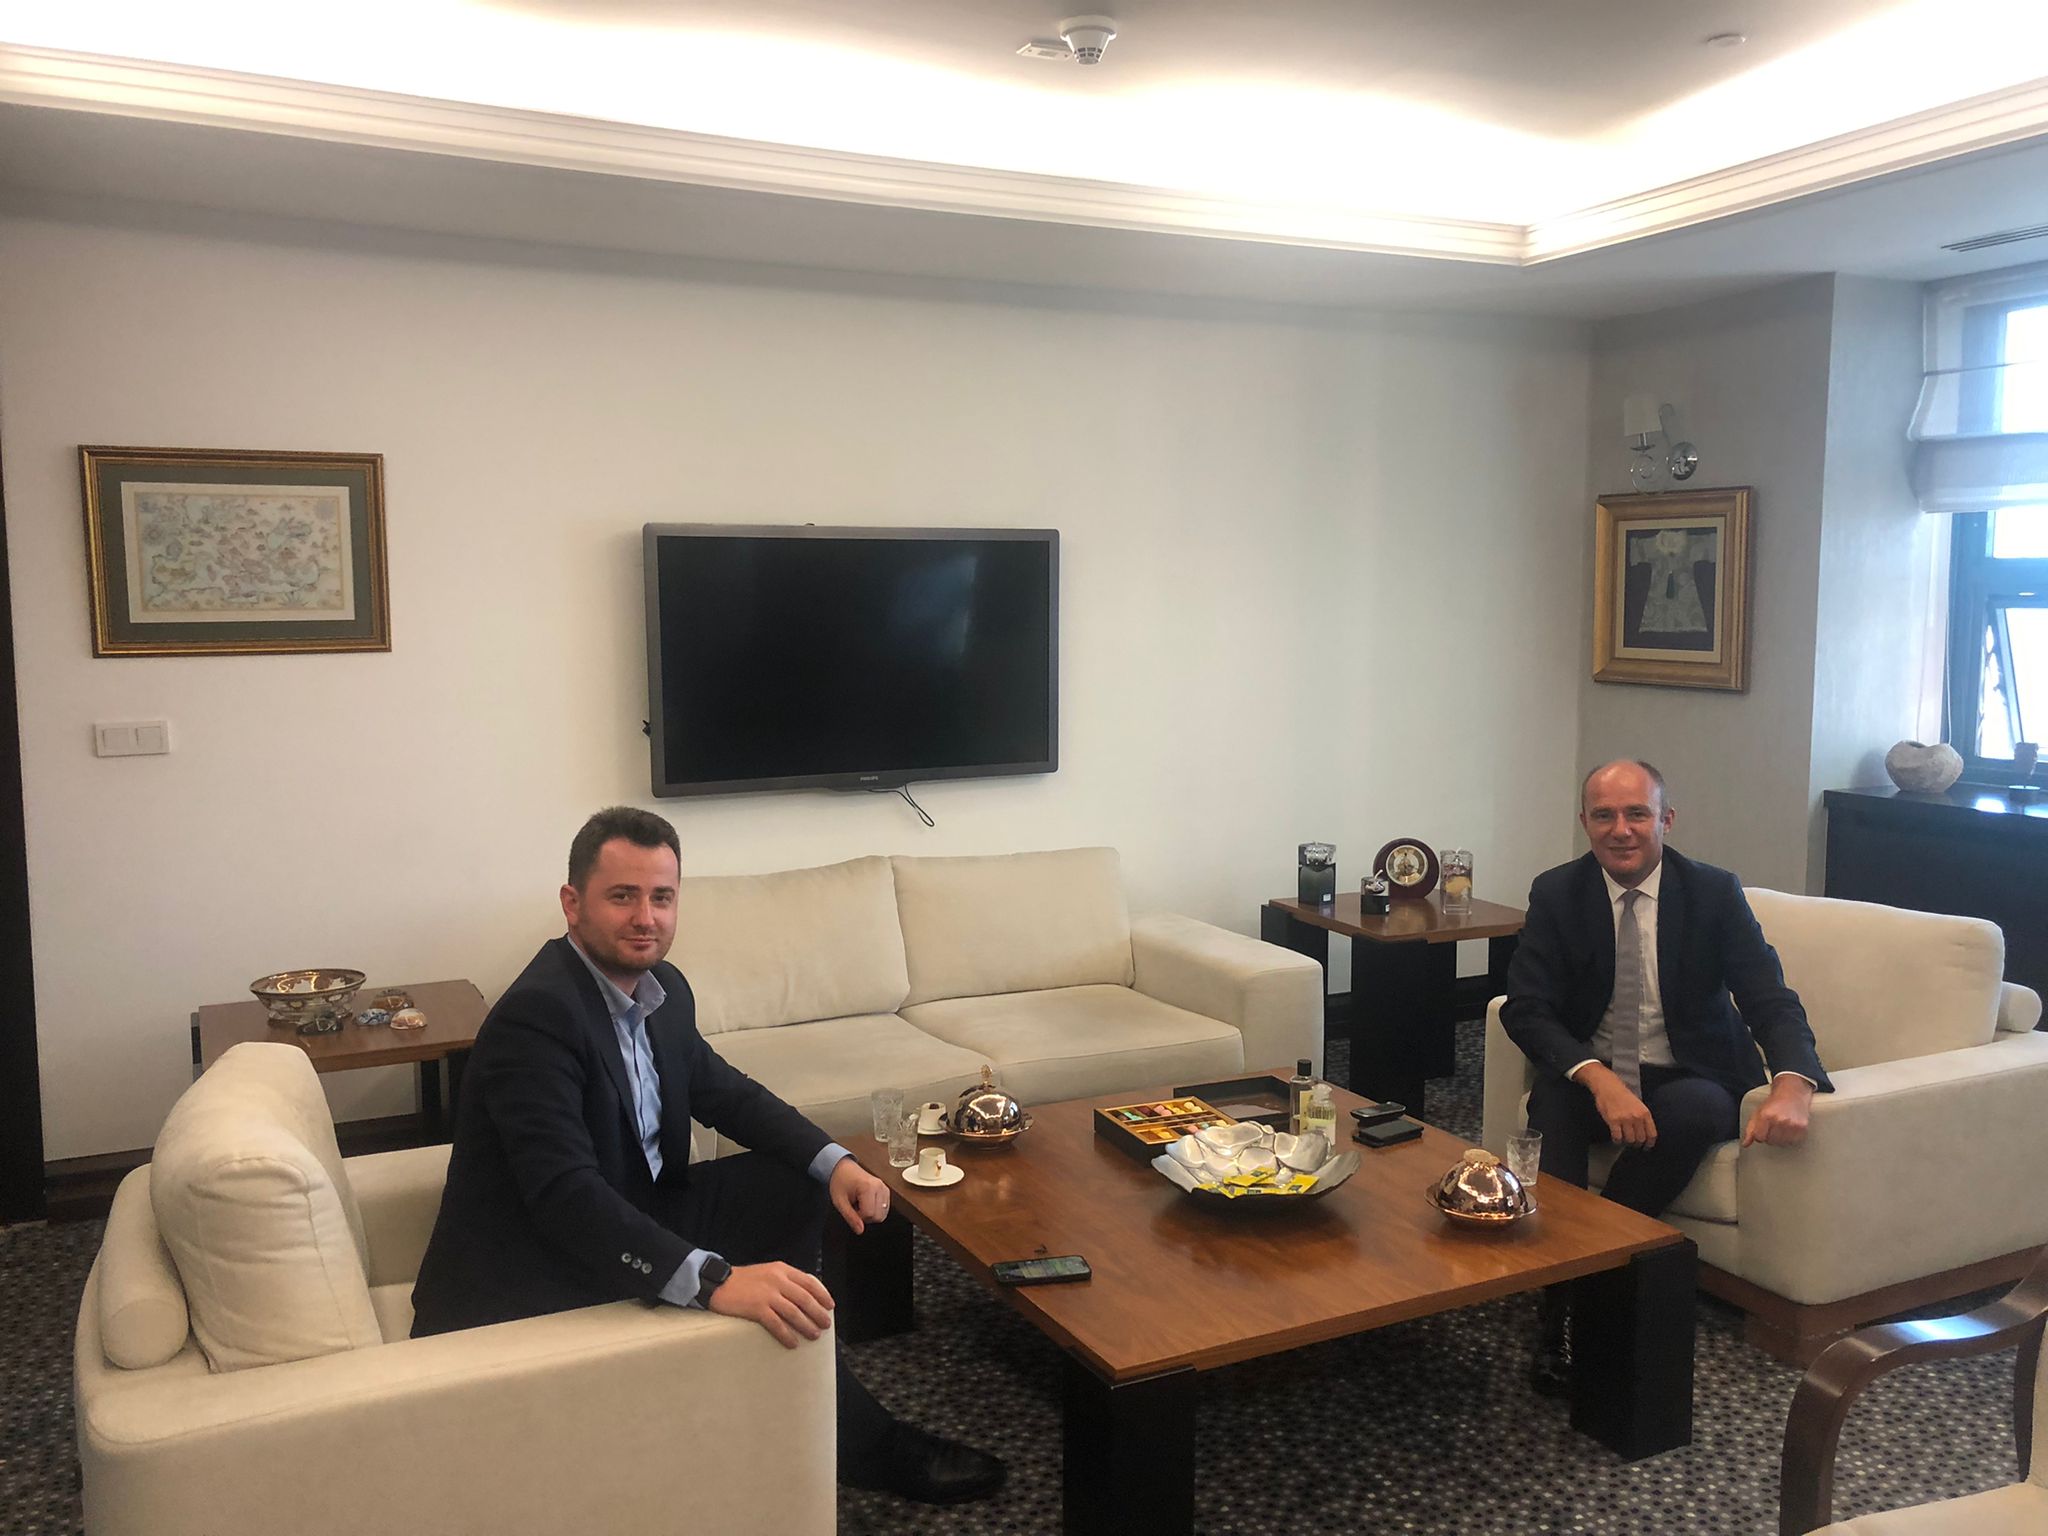 Visit to Bülent Özcan, General Manager of Financial Cooperation and Project Implementation of the Presidency for EU Affairs